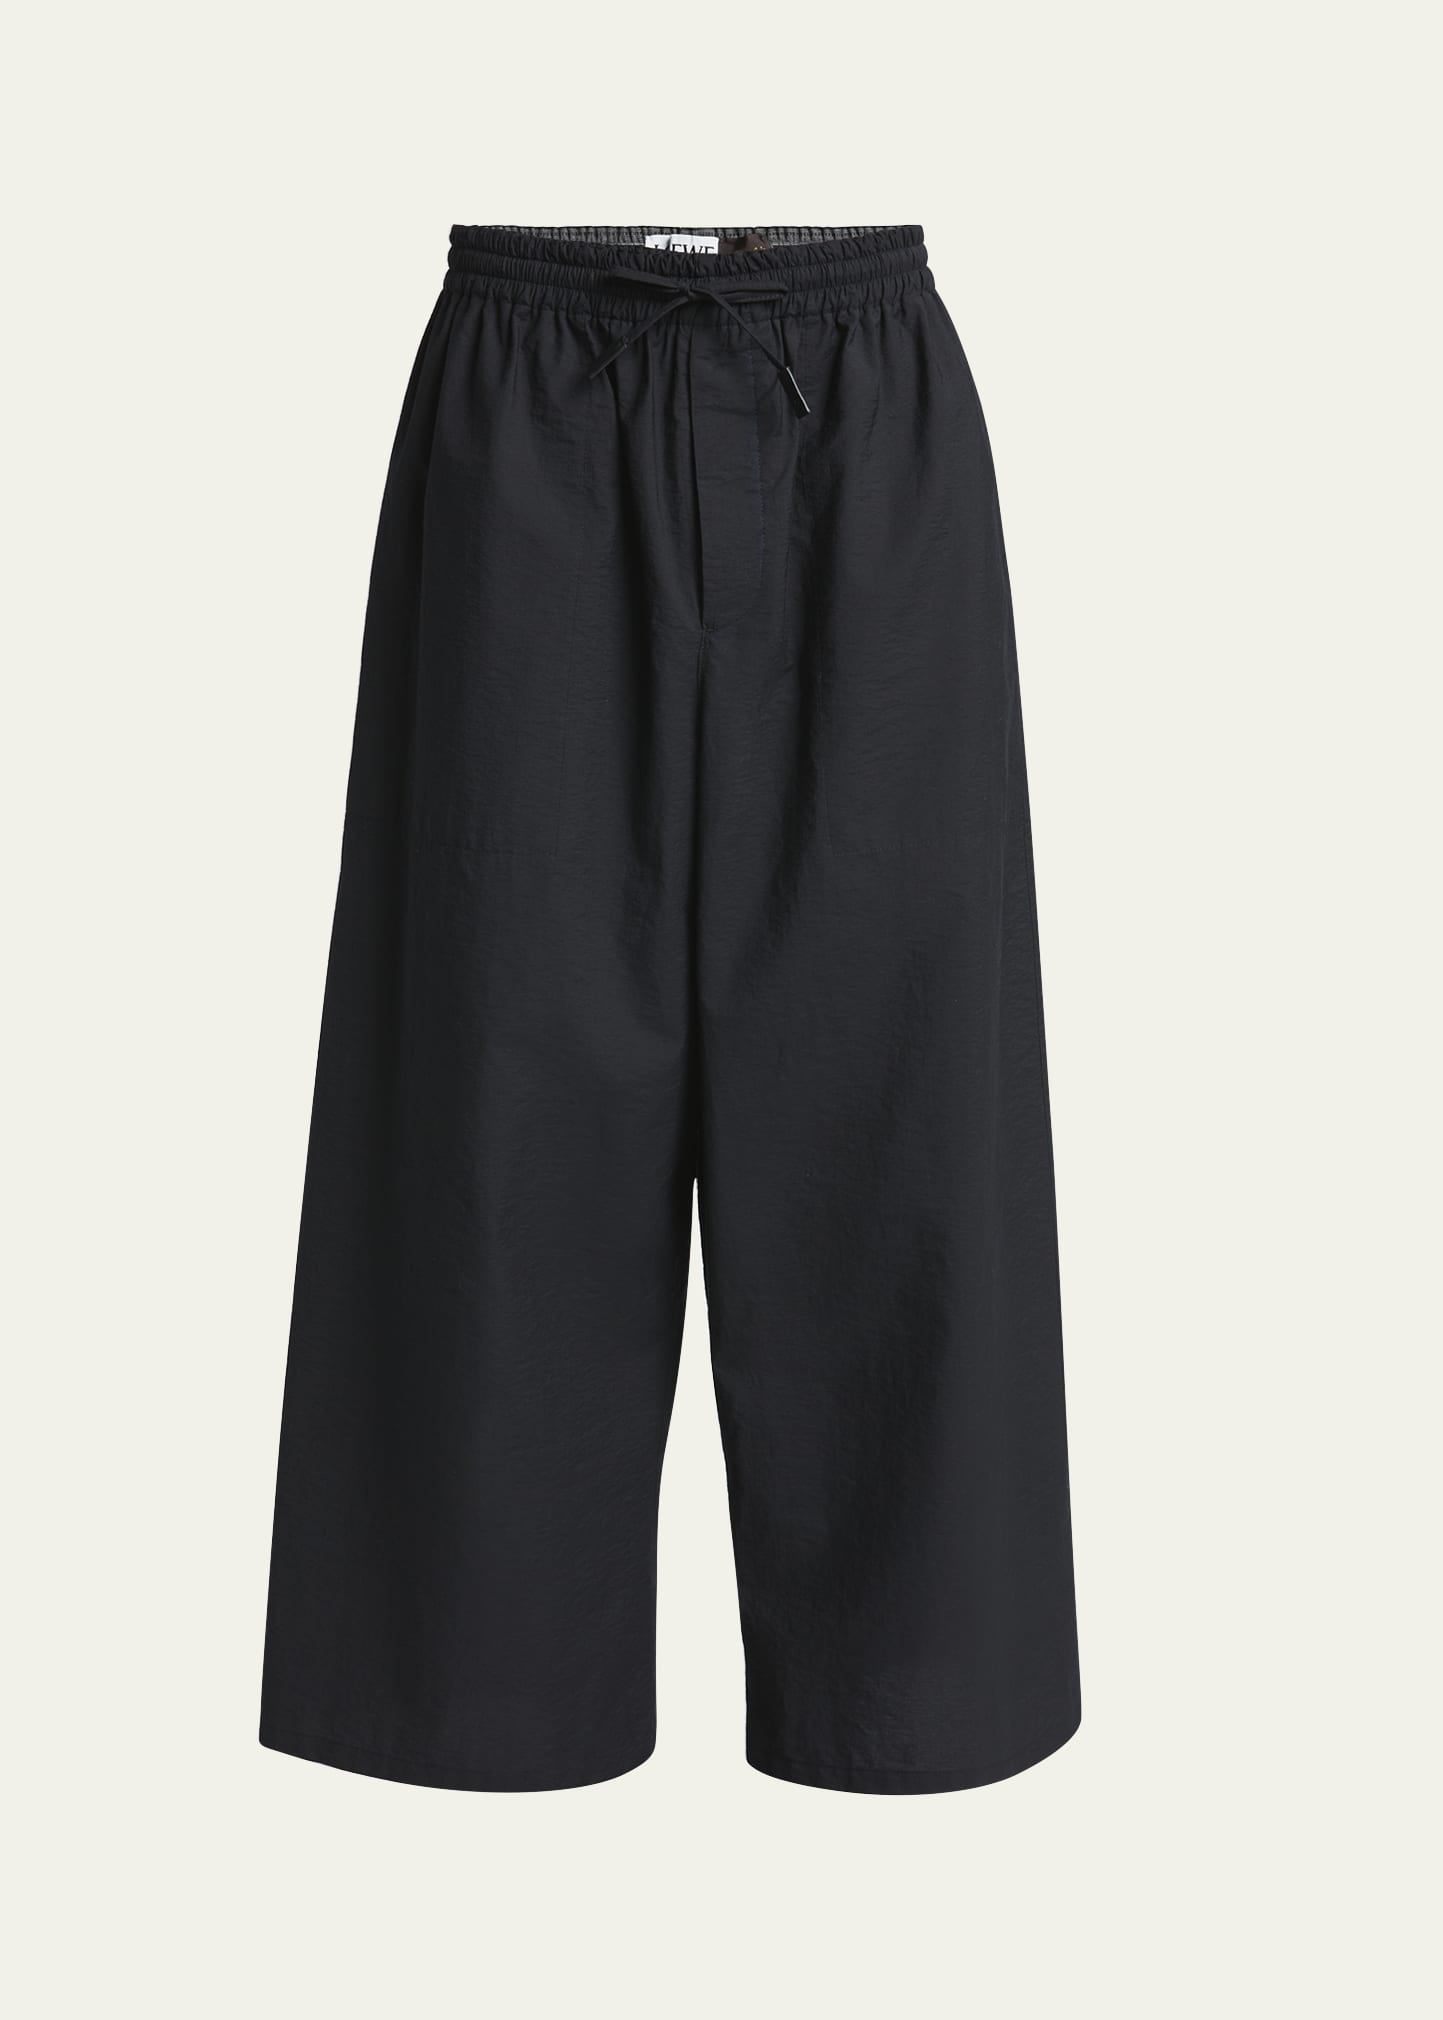 Loewe Men's Cotton-blend Anagram Embroidered Cropped Trousers In Black